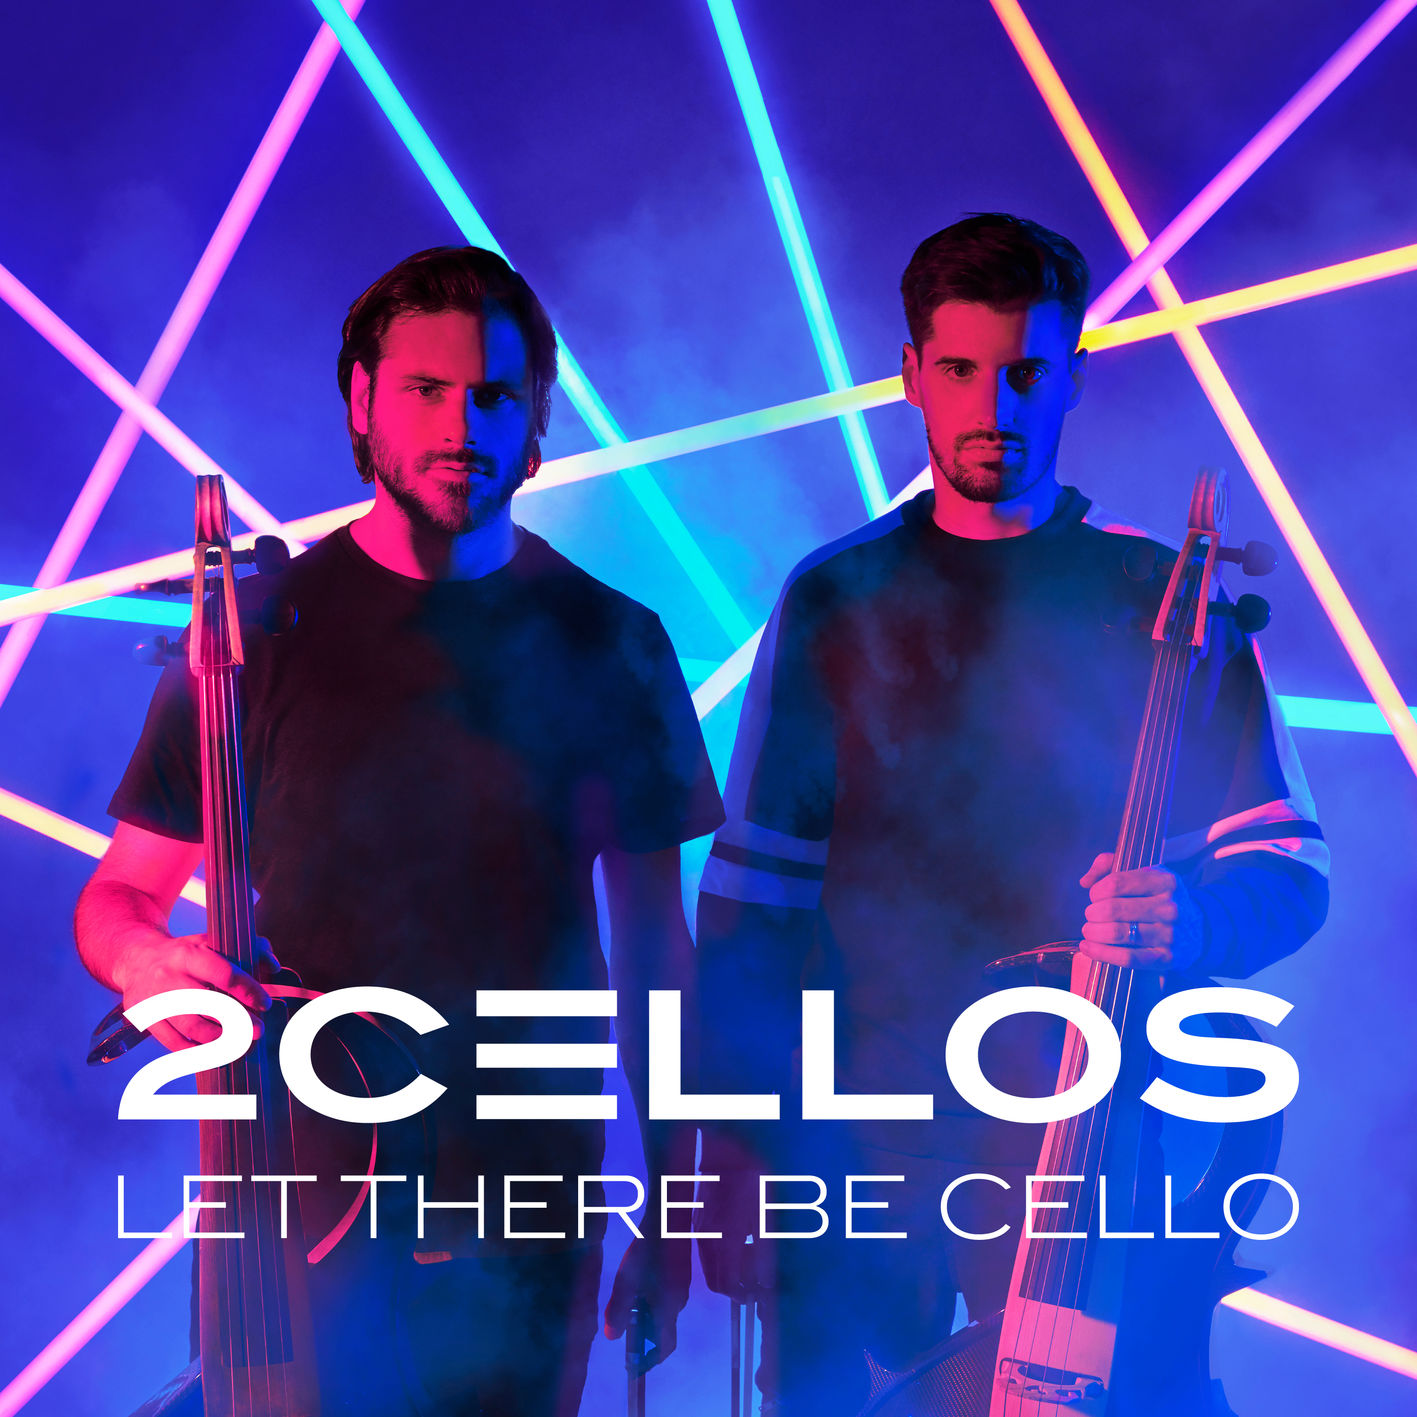 2CELLOS - Let There Be Cello (2018) [FLAC 24bit/44,1kHz]